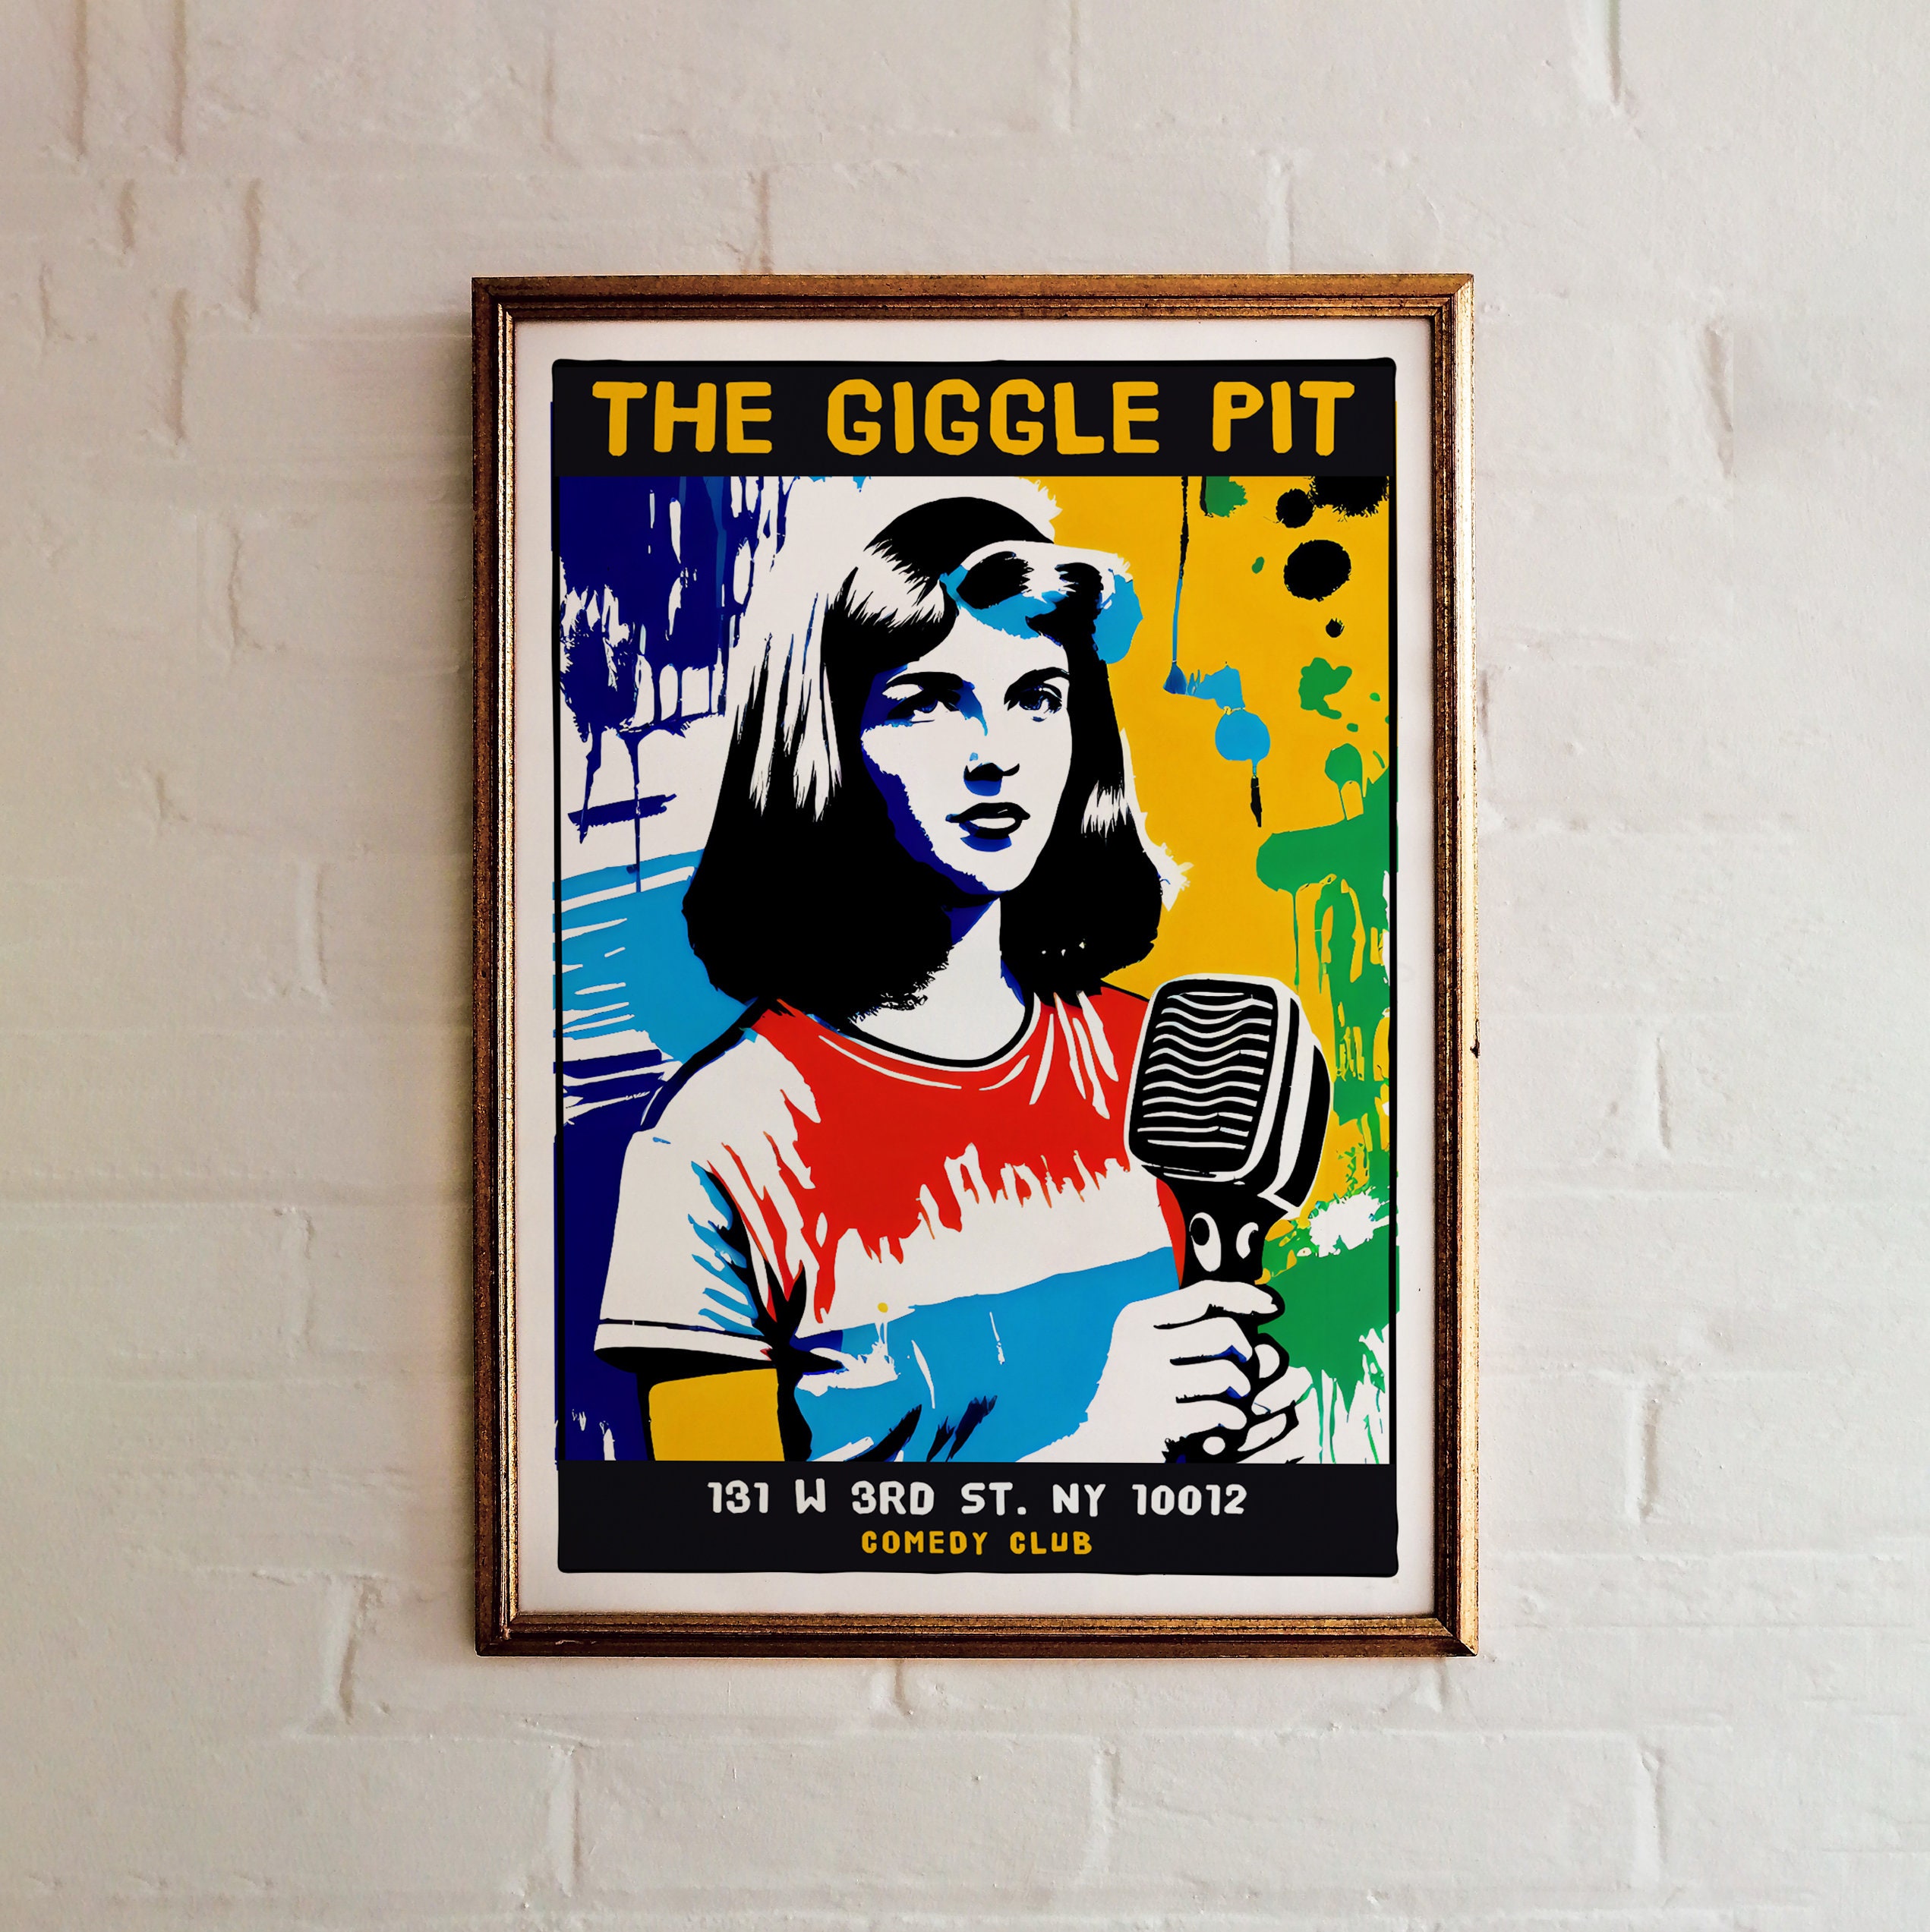 The Giggle Pit Comedy Club Poster Nyc Giclee Reproduction